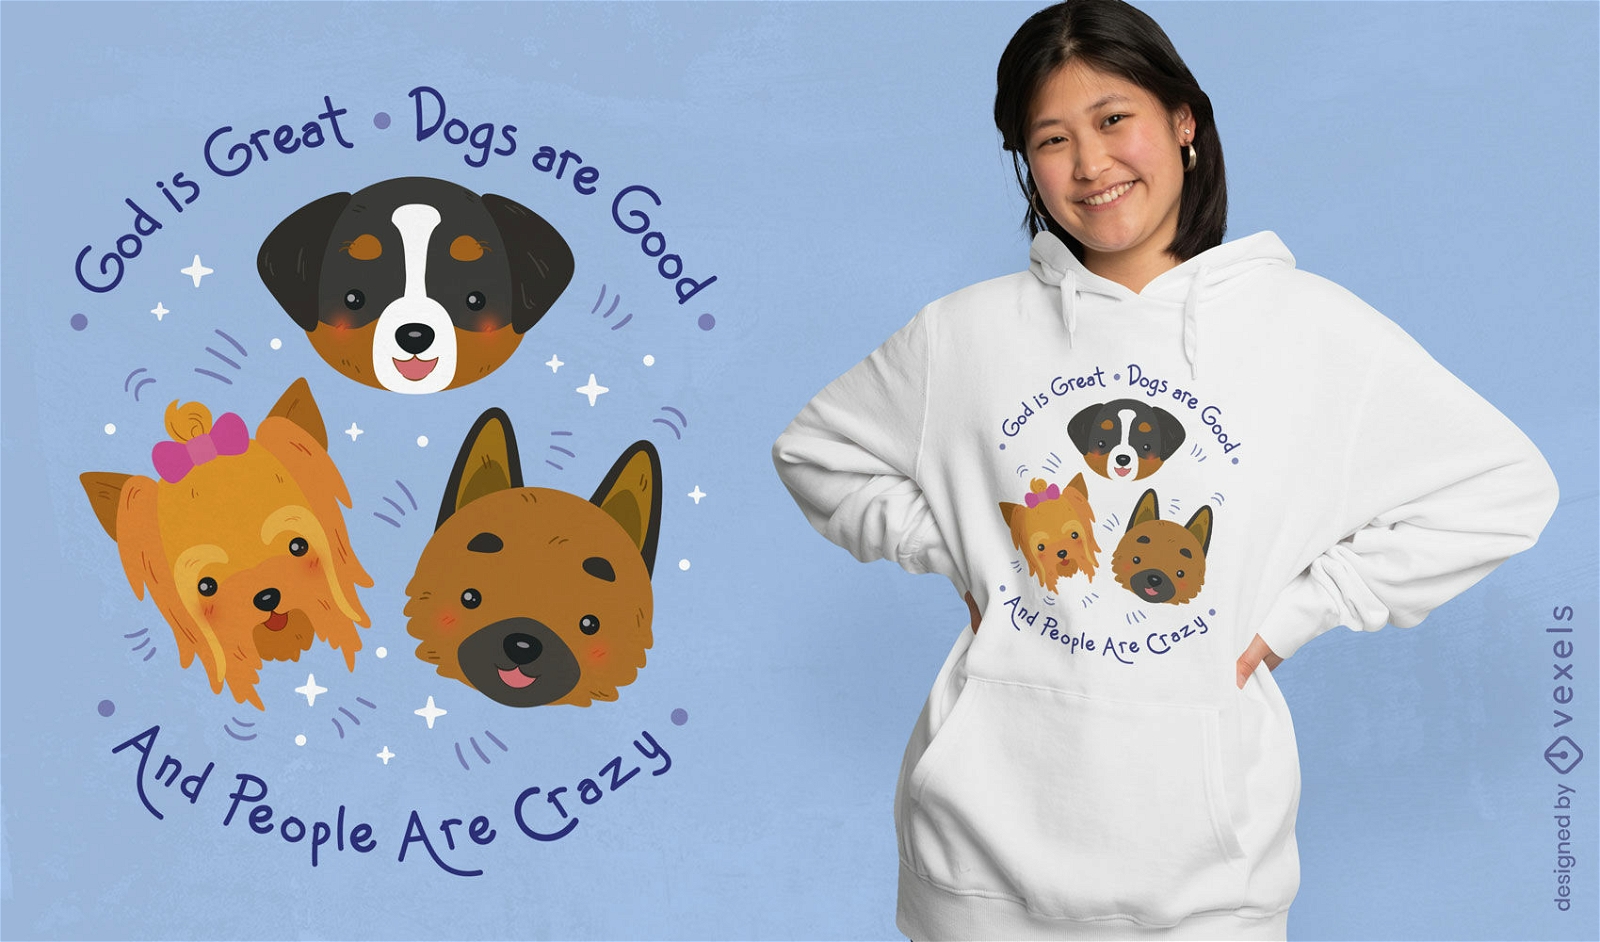 Dogs are good funny pet t-shirt design